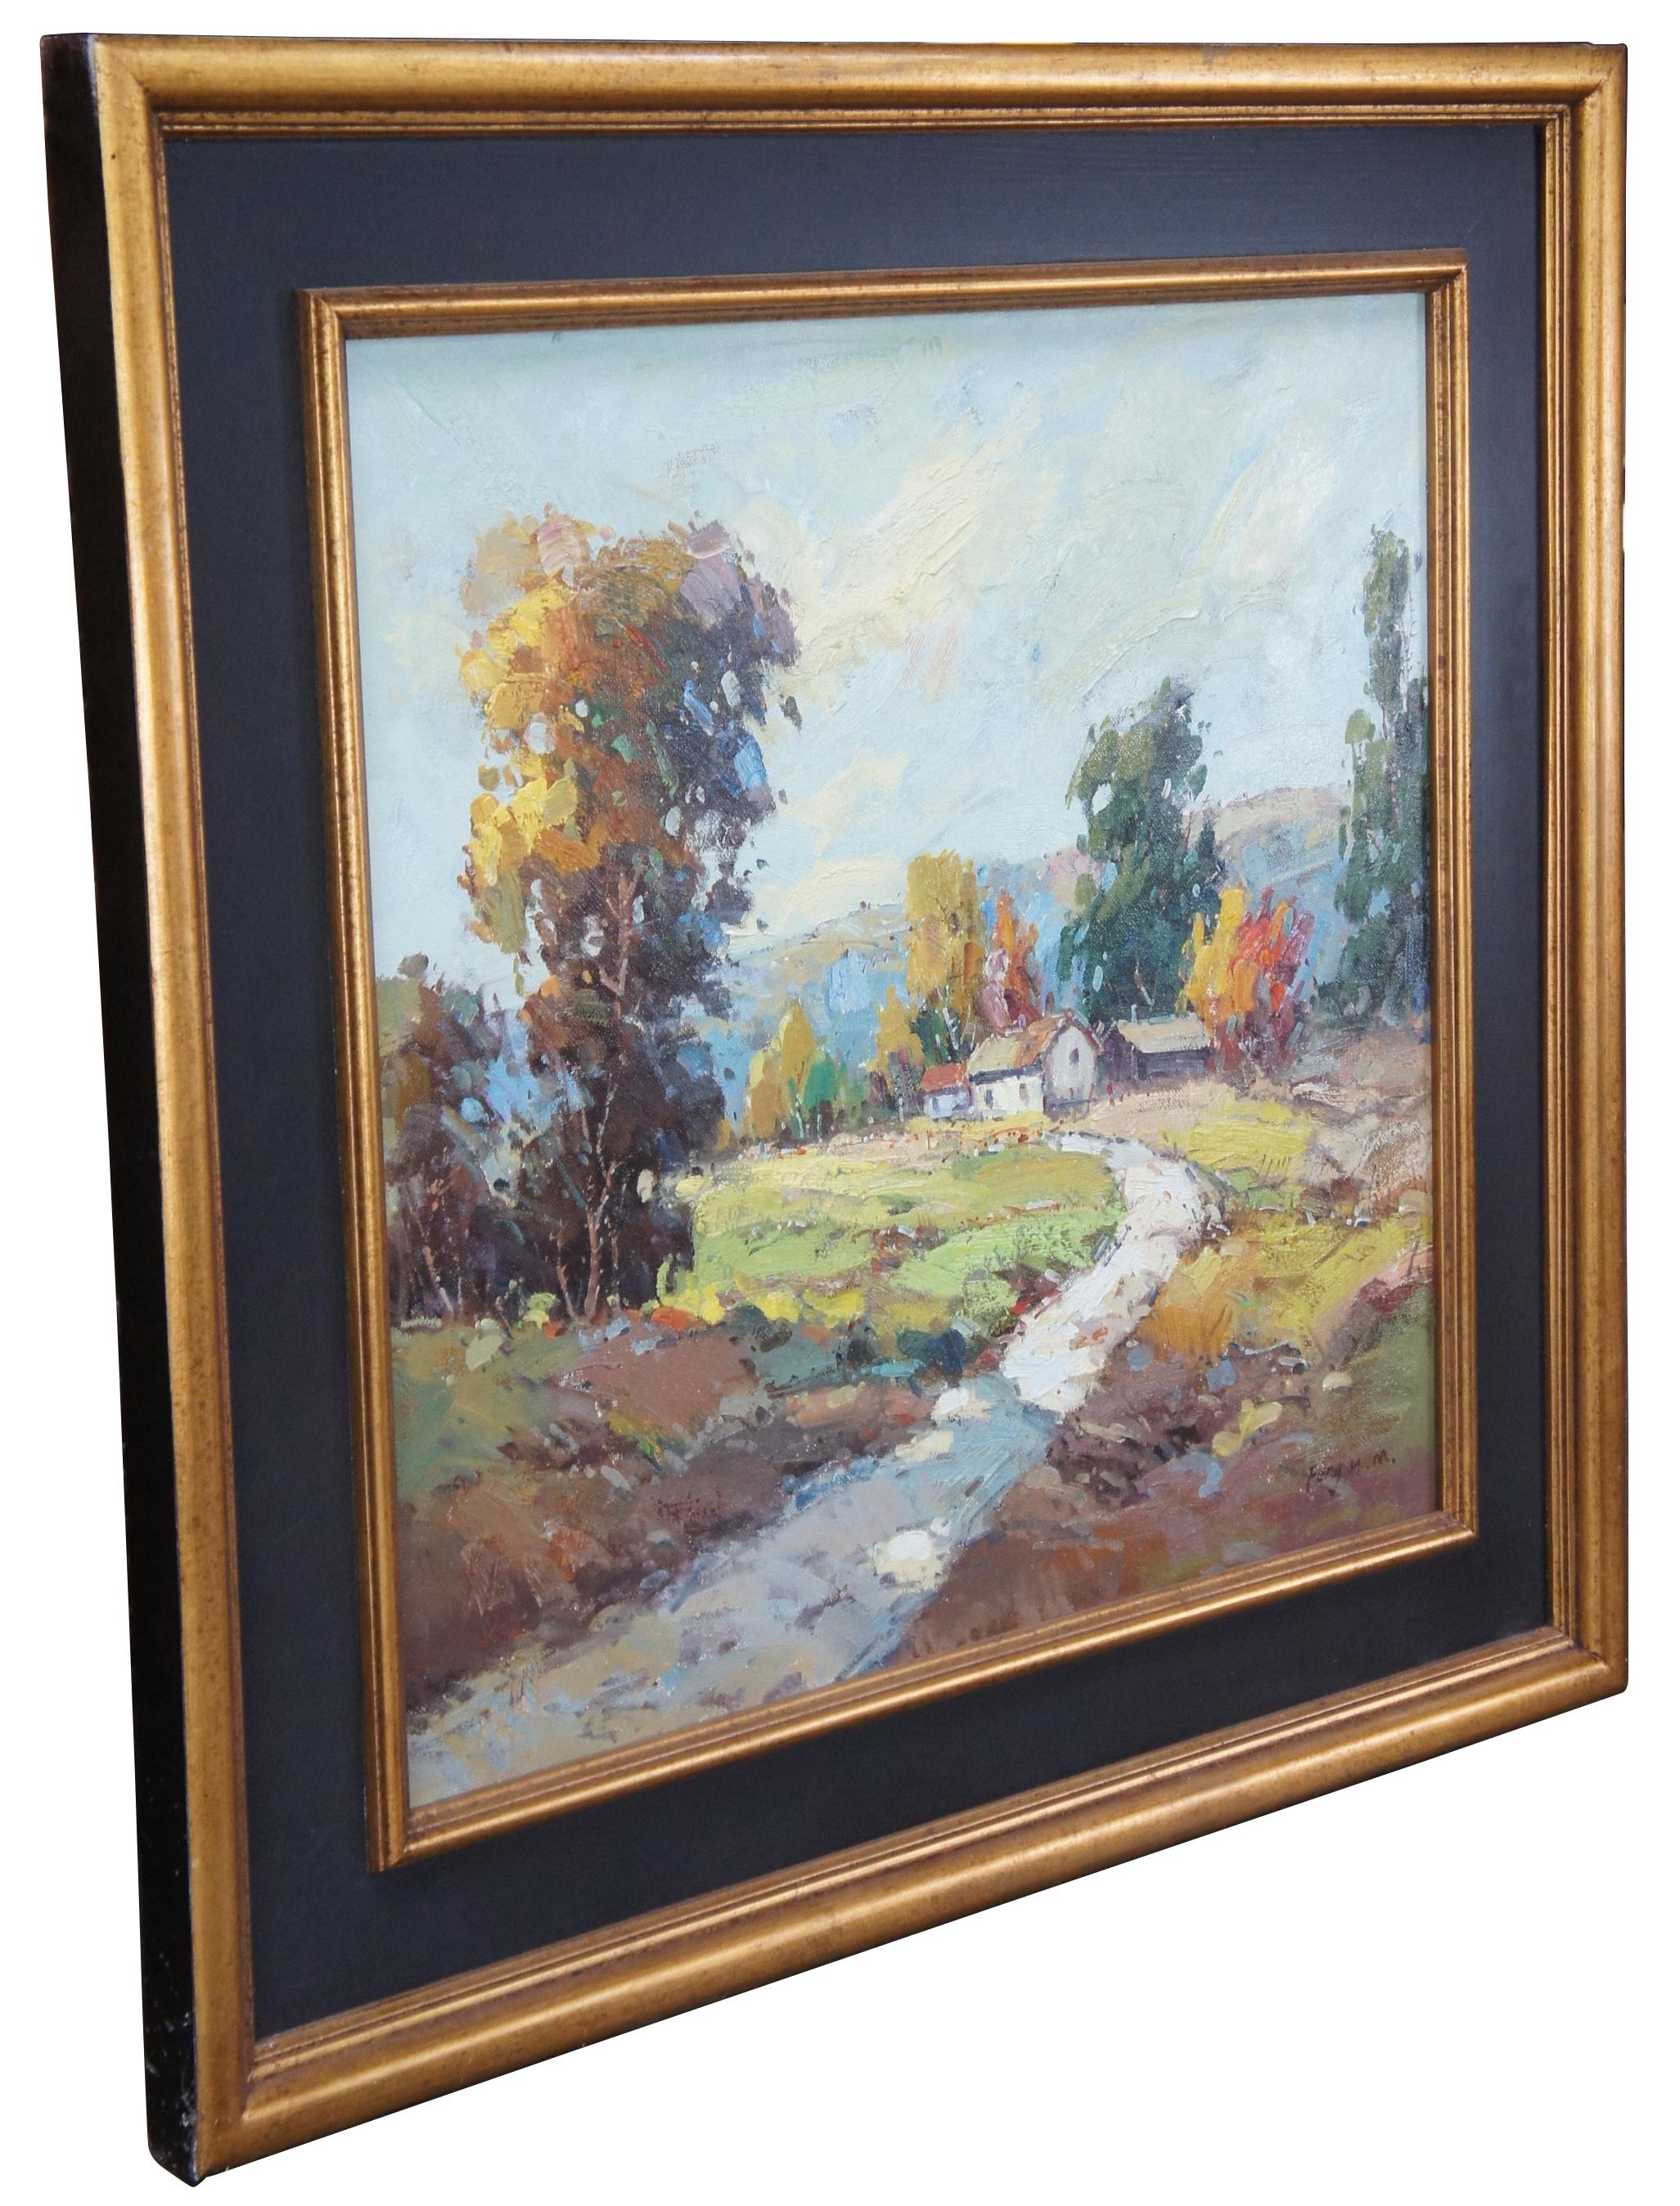 Original oil painting by Feng H.M. Featuring a landscape scene with a road leading to a grouping of cottages set against the backdrop of a large hillside or mountain range.

art 30